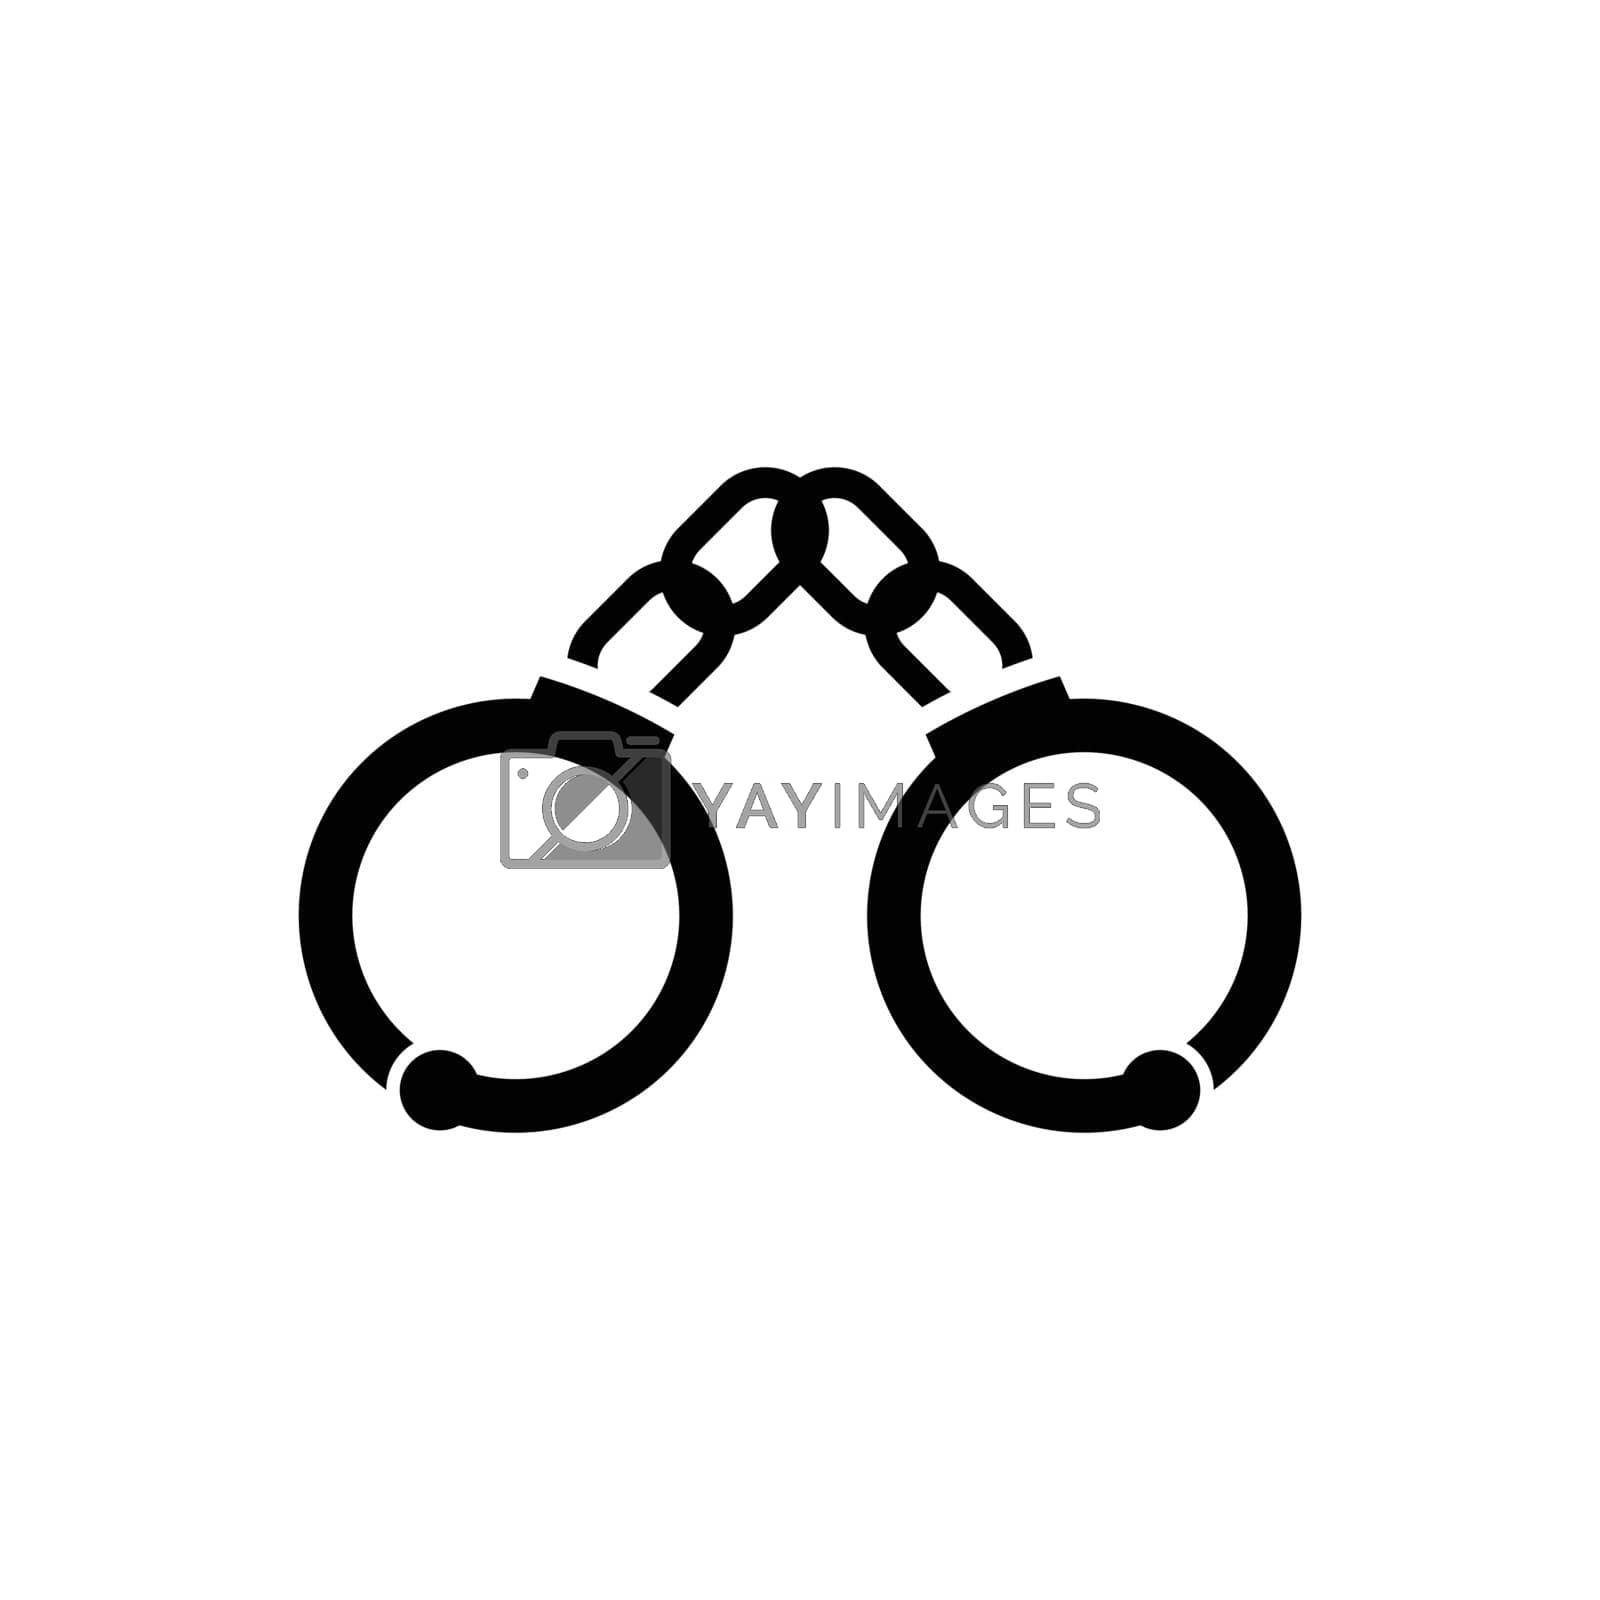 Royalty free image of Handcuffs icon by delwar018